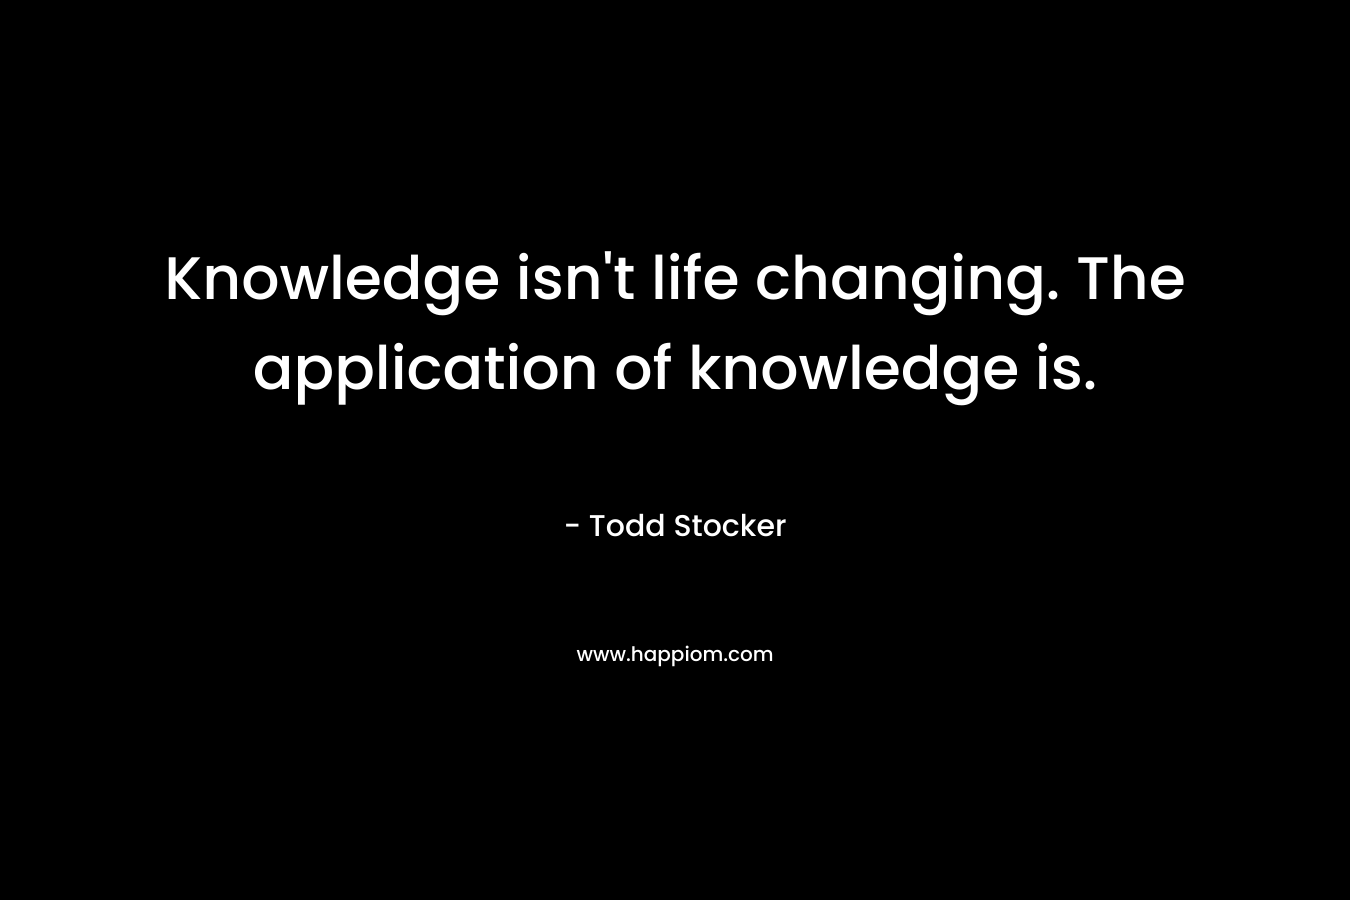 Knowledge isn't life changing. The application of knowledge is.